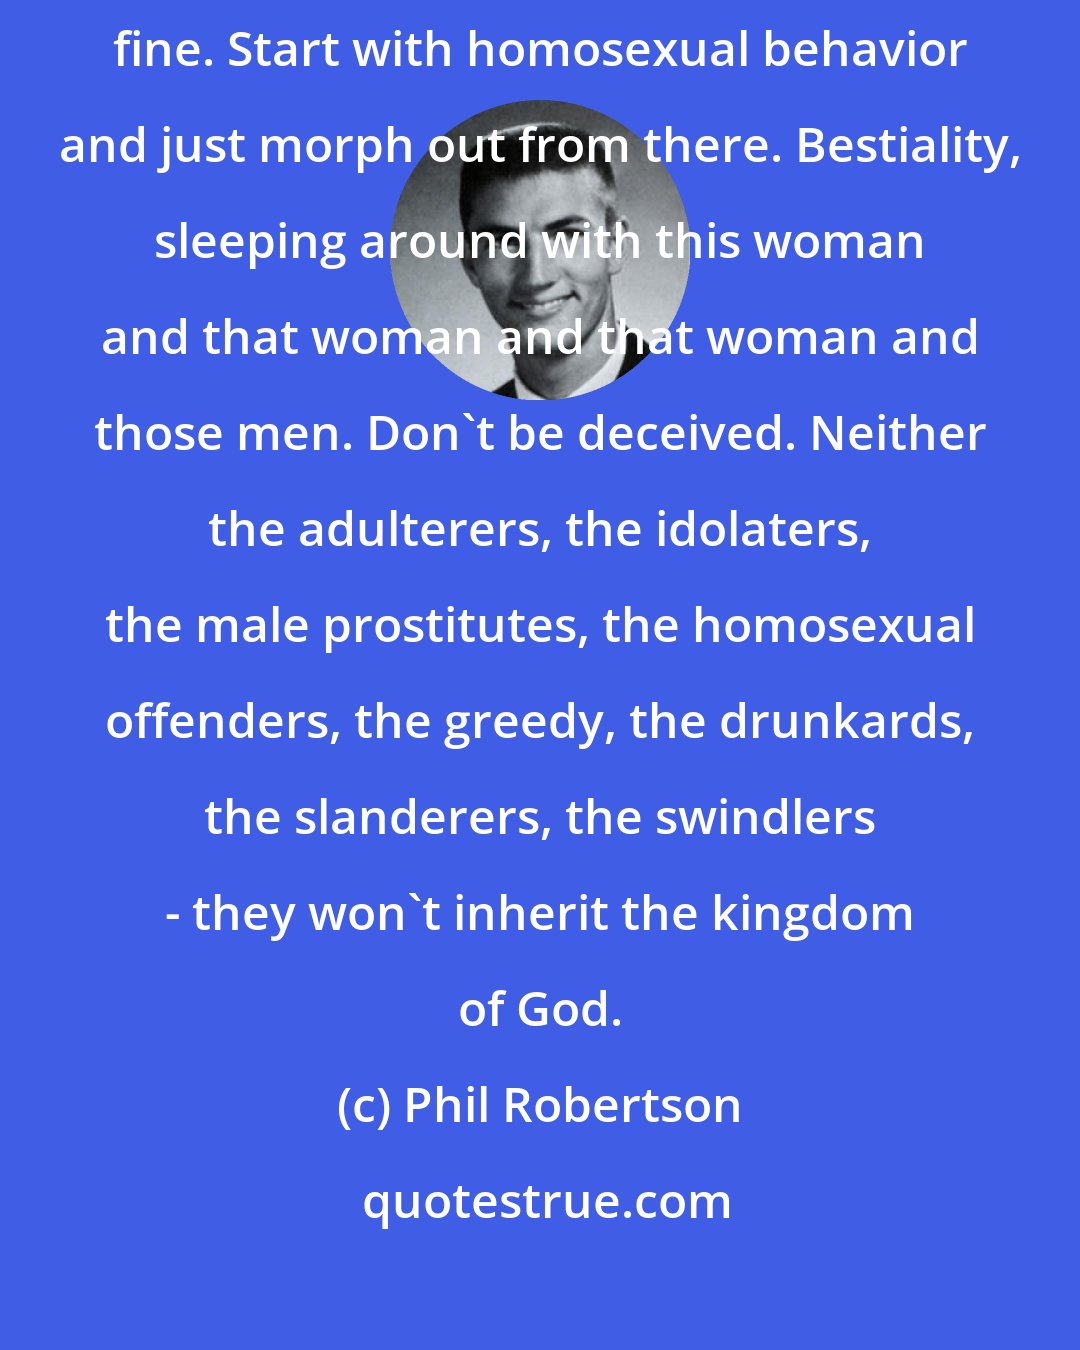 Phil Robertson: Everything is blurred on what's right and what's wrong ... Sin becomes fine. Start with homosexual behavior and just morph out from there. Bestiality, sleeping around with this woman and that woman and that woman and those men. Don't be deceived. Neither the adulterers, the idolaters, the male prostitutes, the homosexual offenders, the greedy, the drunkards, the slanderers, the swindlers - they won't inherit the kingdom of God.